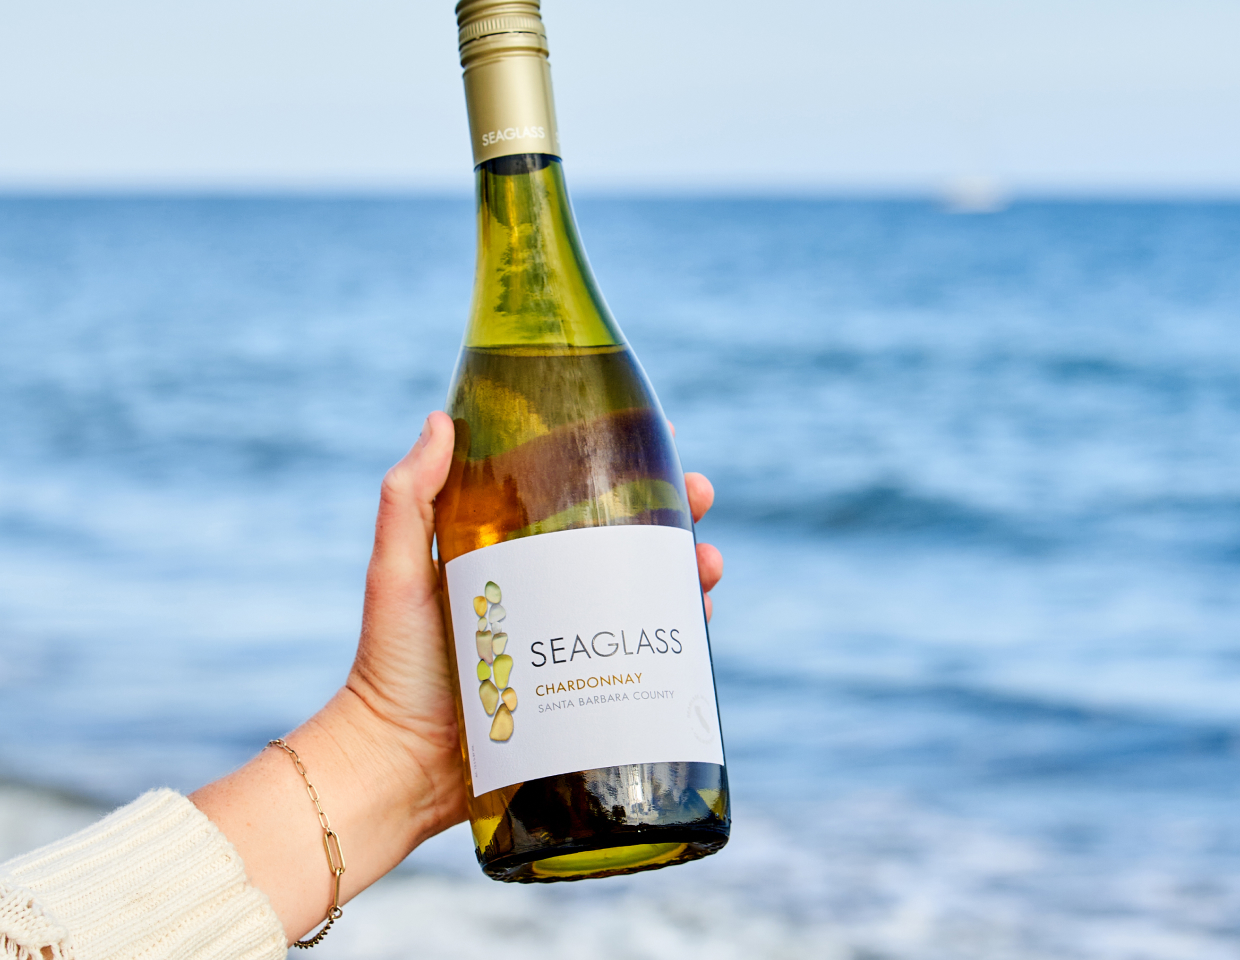 Person holding bottle of Seaglass Chardonnay in front of a beautiful blue sea.